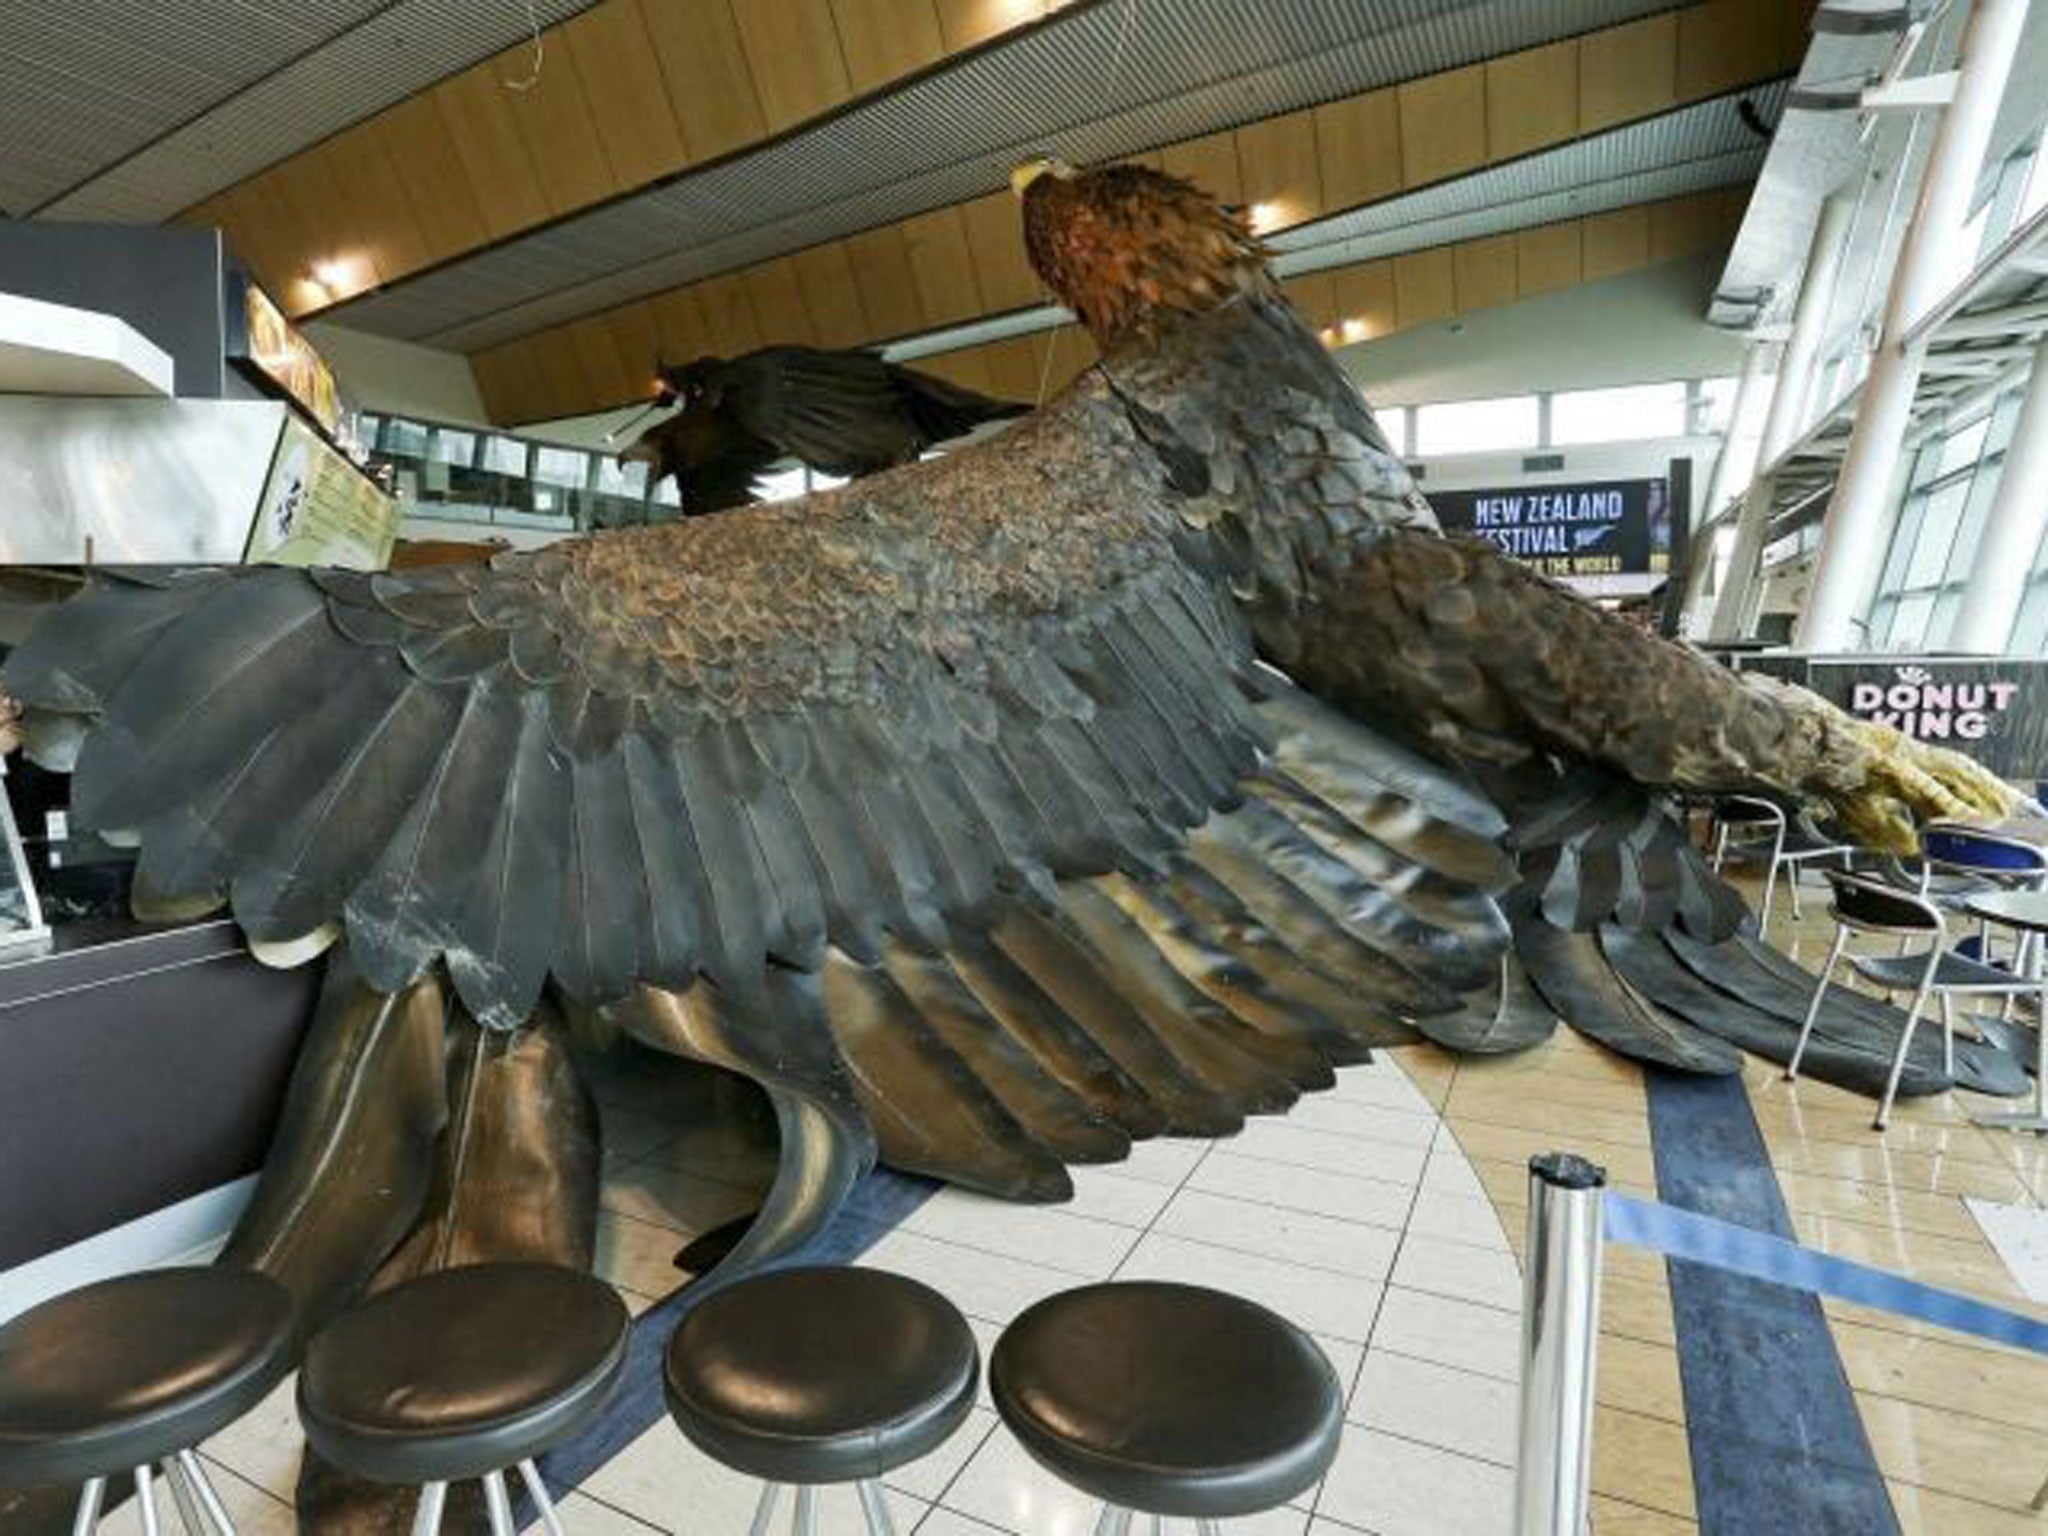 A giant eagle sculpture promoting 'The Hobbit' movie trilogy lying on the ground after it fell in the wake of an earthquake at Wellington Airport.